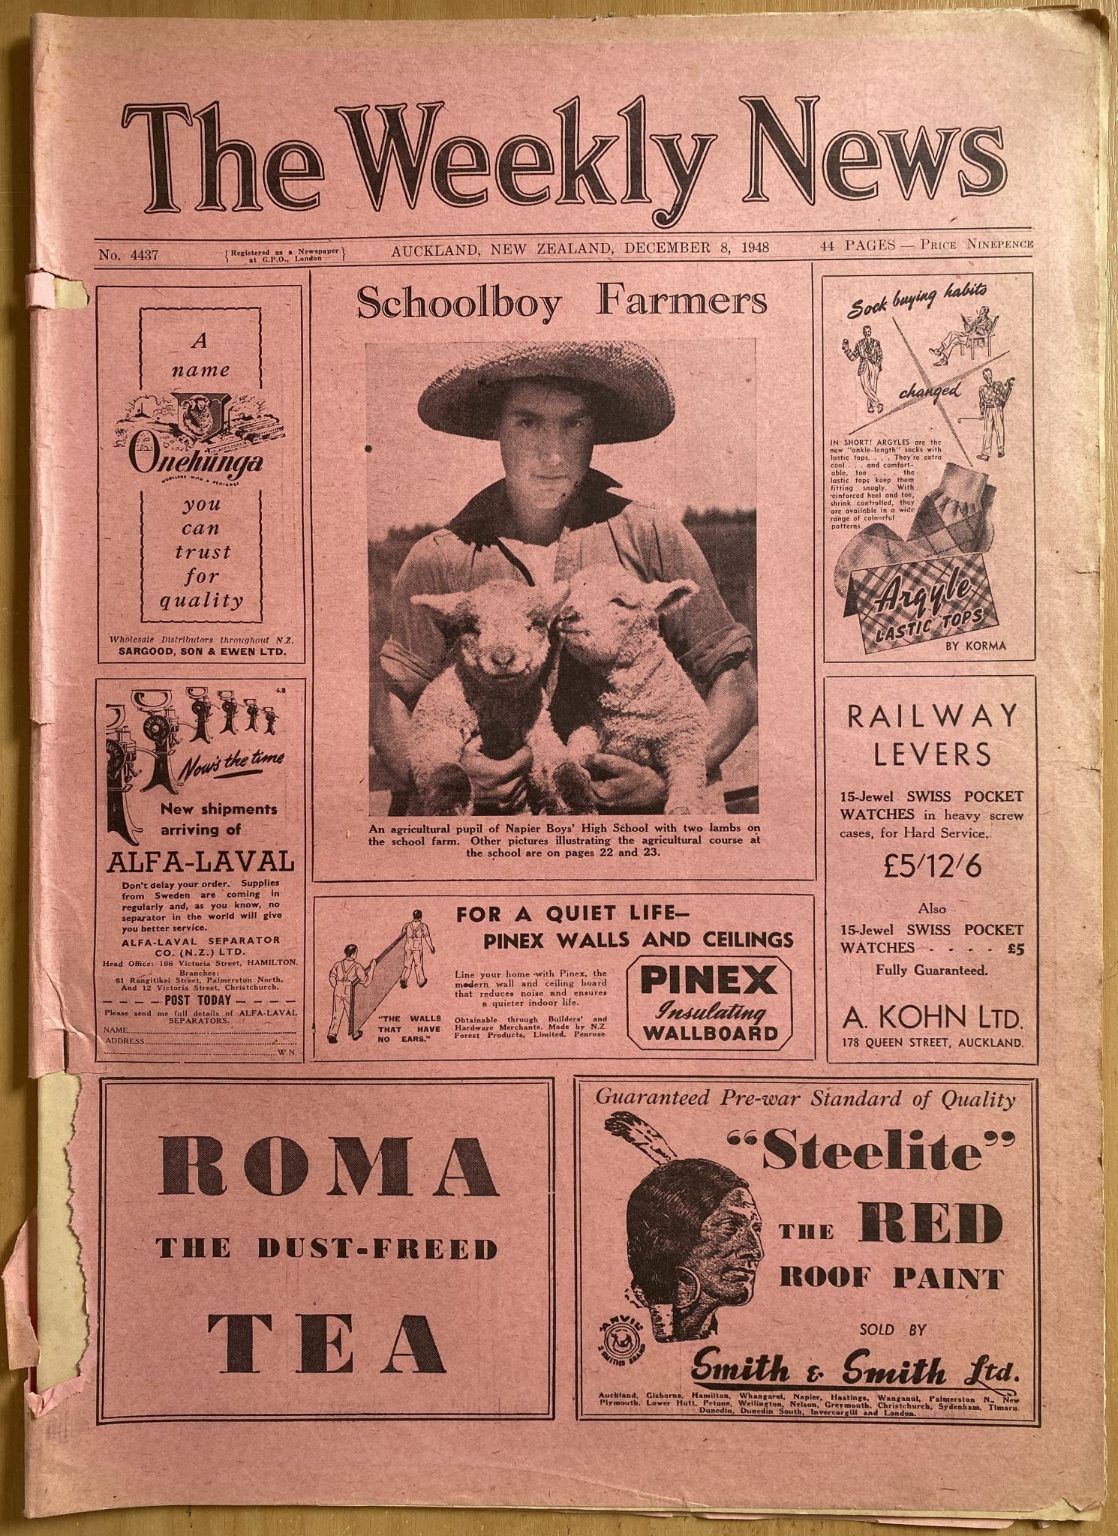 OLD NEWSPAPER: The Weekly News - No. 4437, 8 December 1948